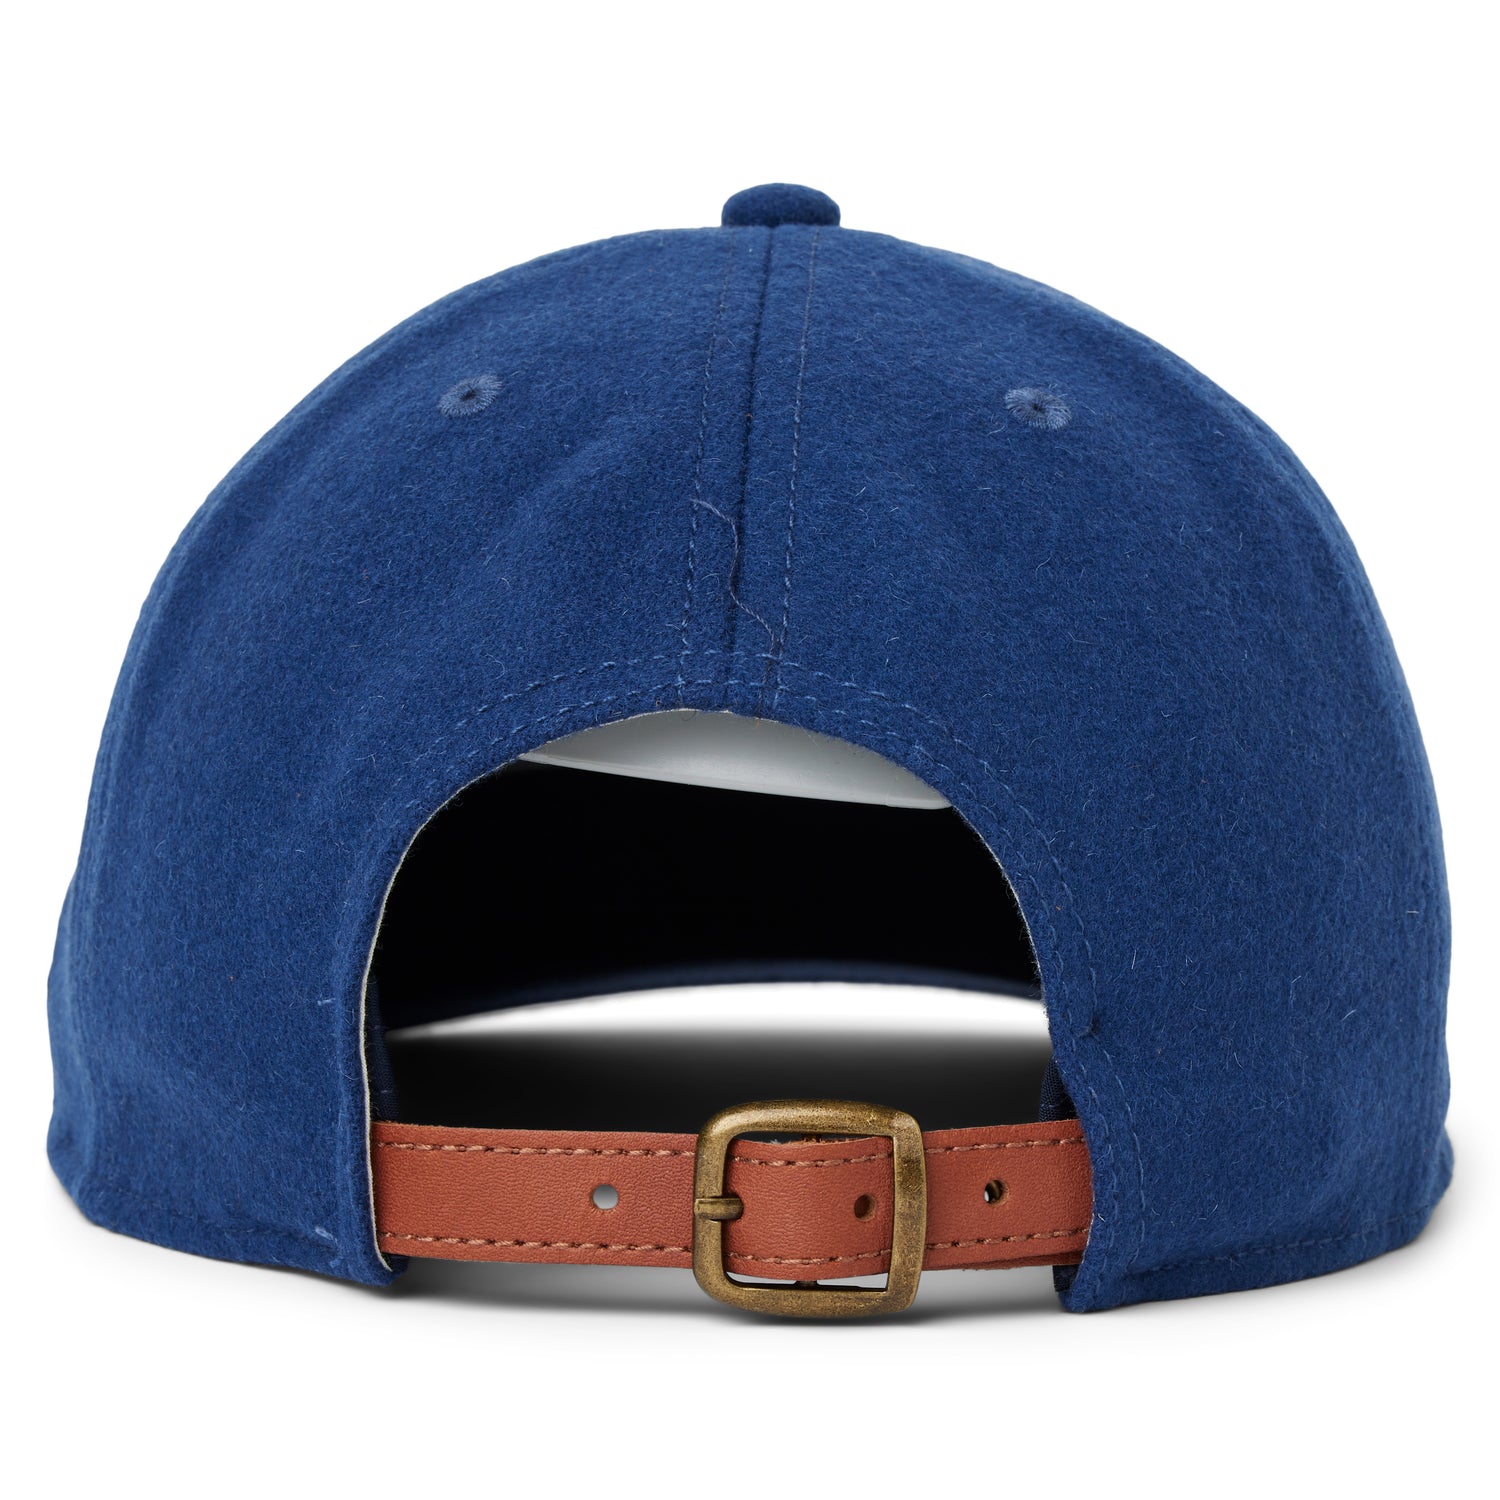 THE LEAGUE WOOL ADJUSTABLE HAT - NAVY